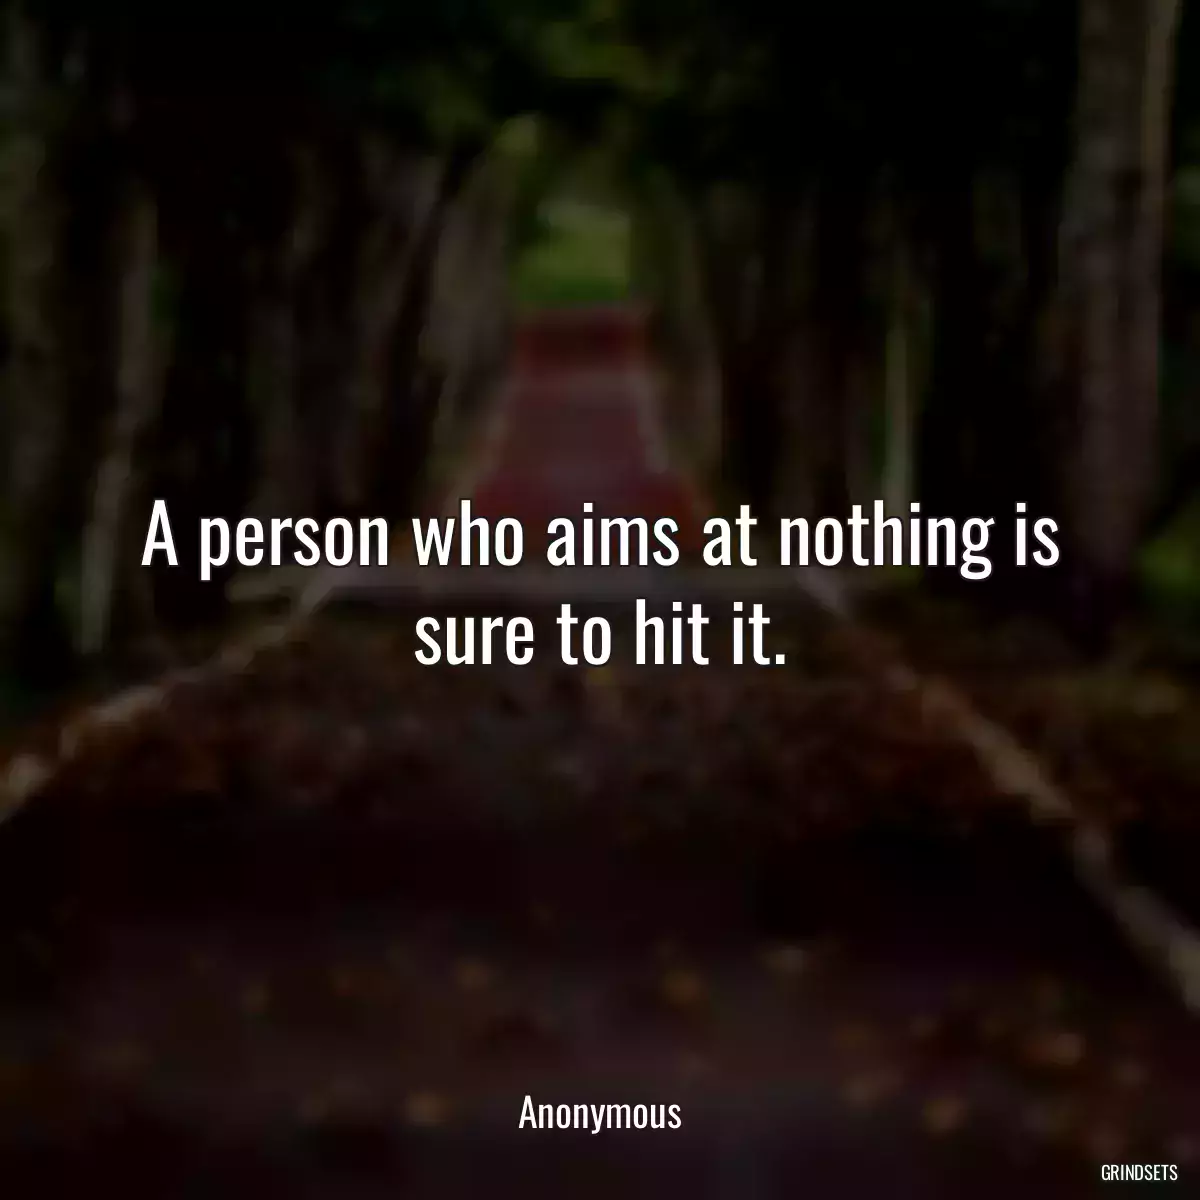 A person who aims at nothing is sure to hit it.